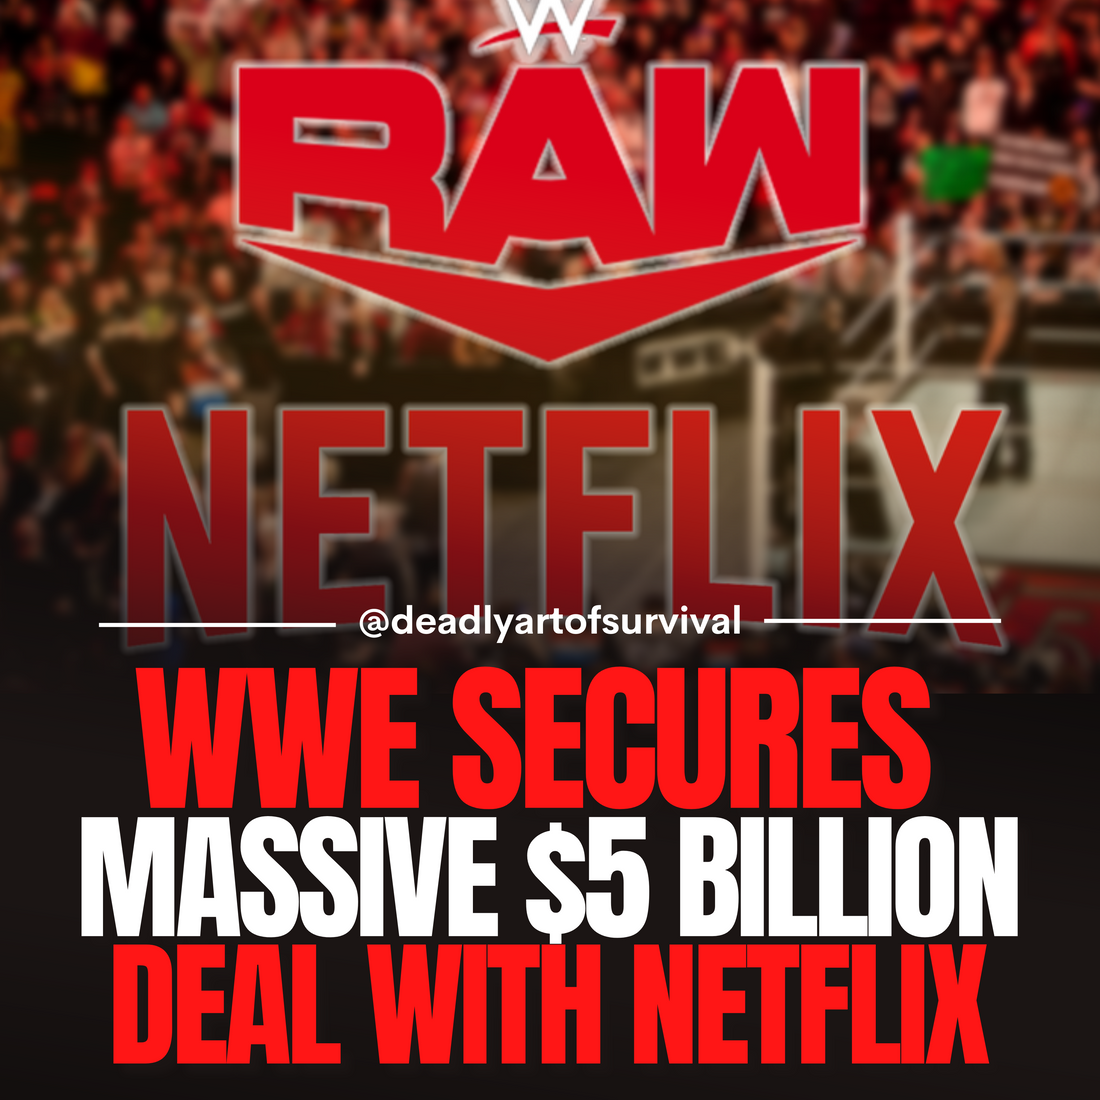 WWE-Secures-Massive-5-Billion-Deal-with-Netflix-RAW-Makes-Bold-Move-to-Streaming deadlyartofsurvival.com